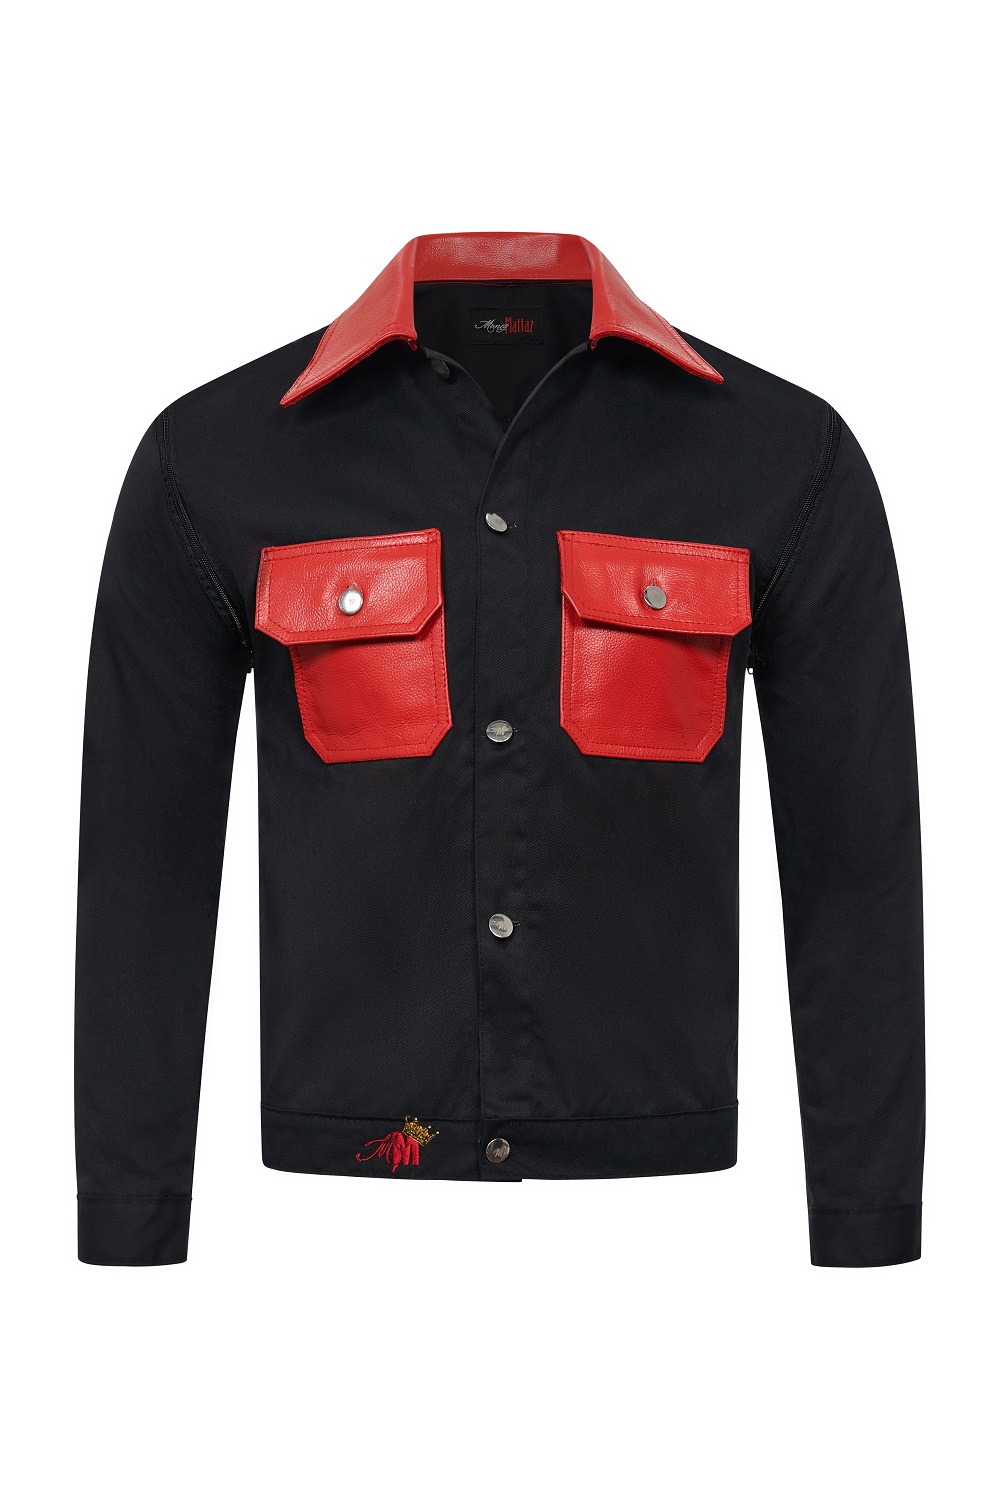 Bougie Denim and Leather Suit Red and Black